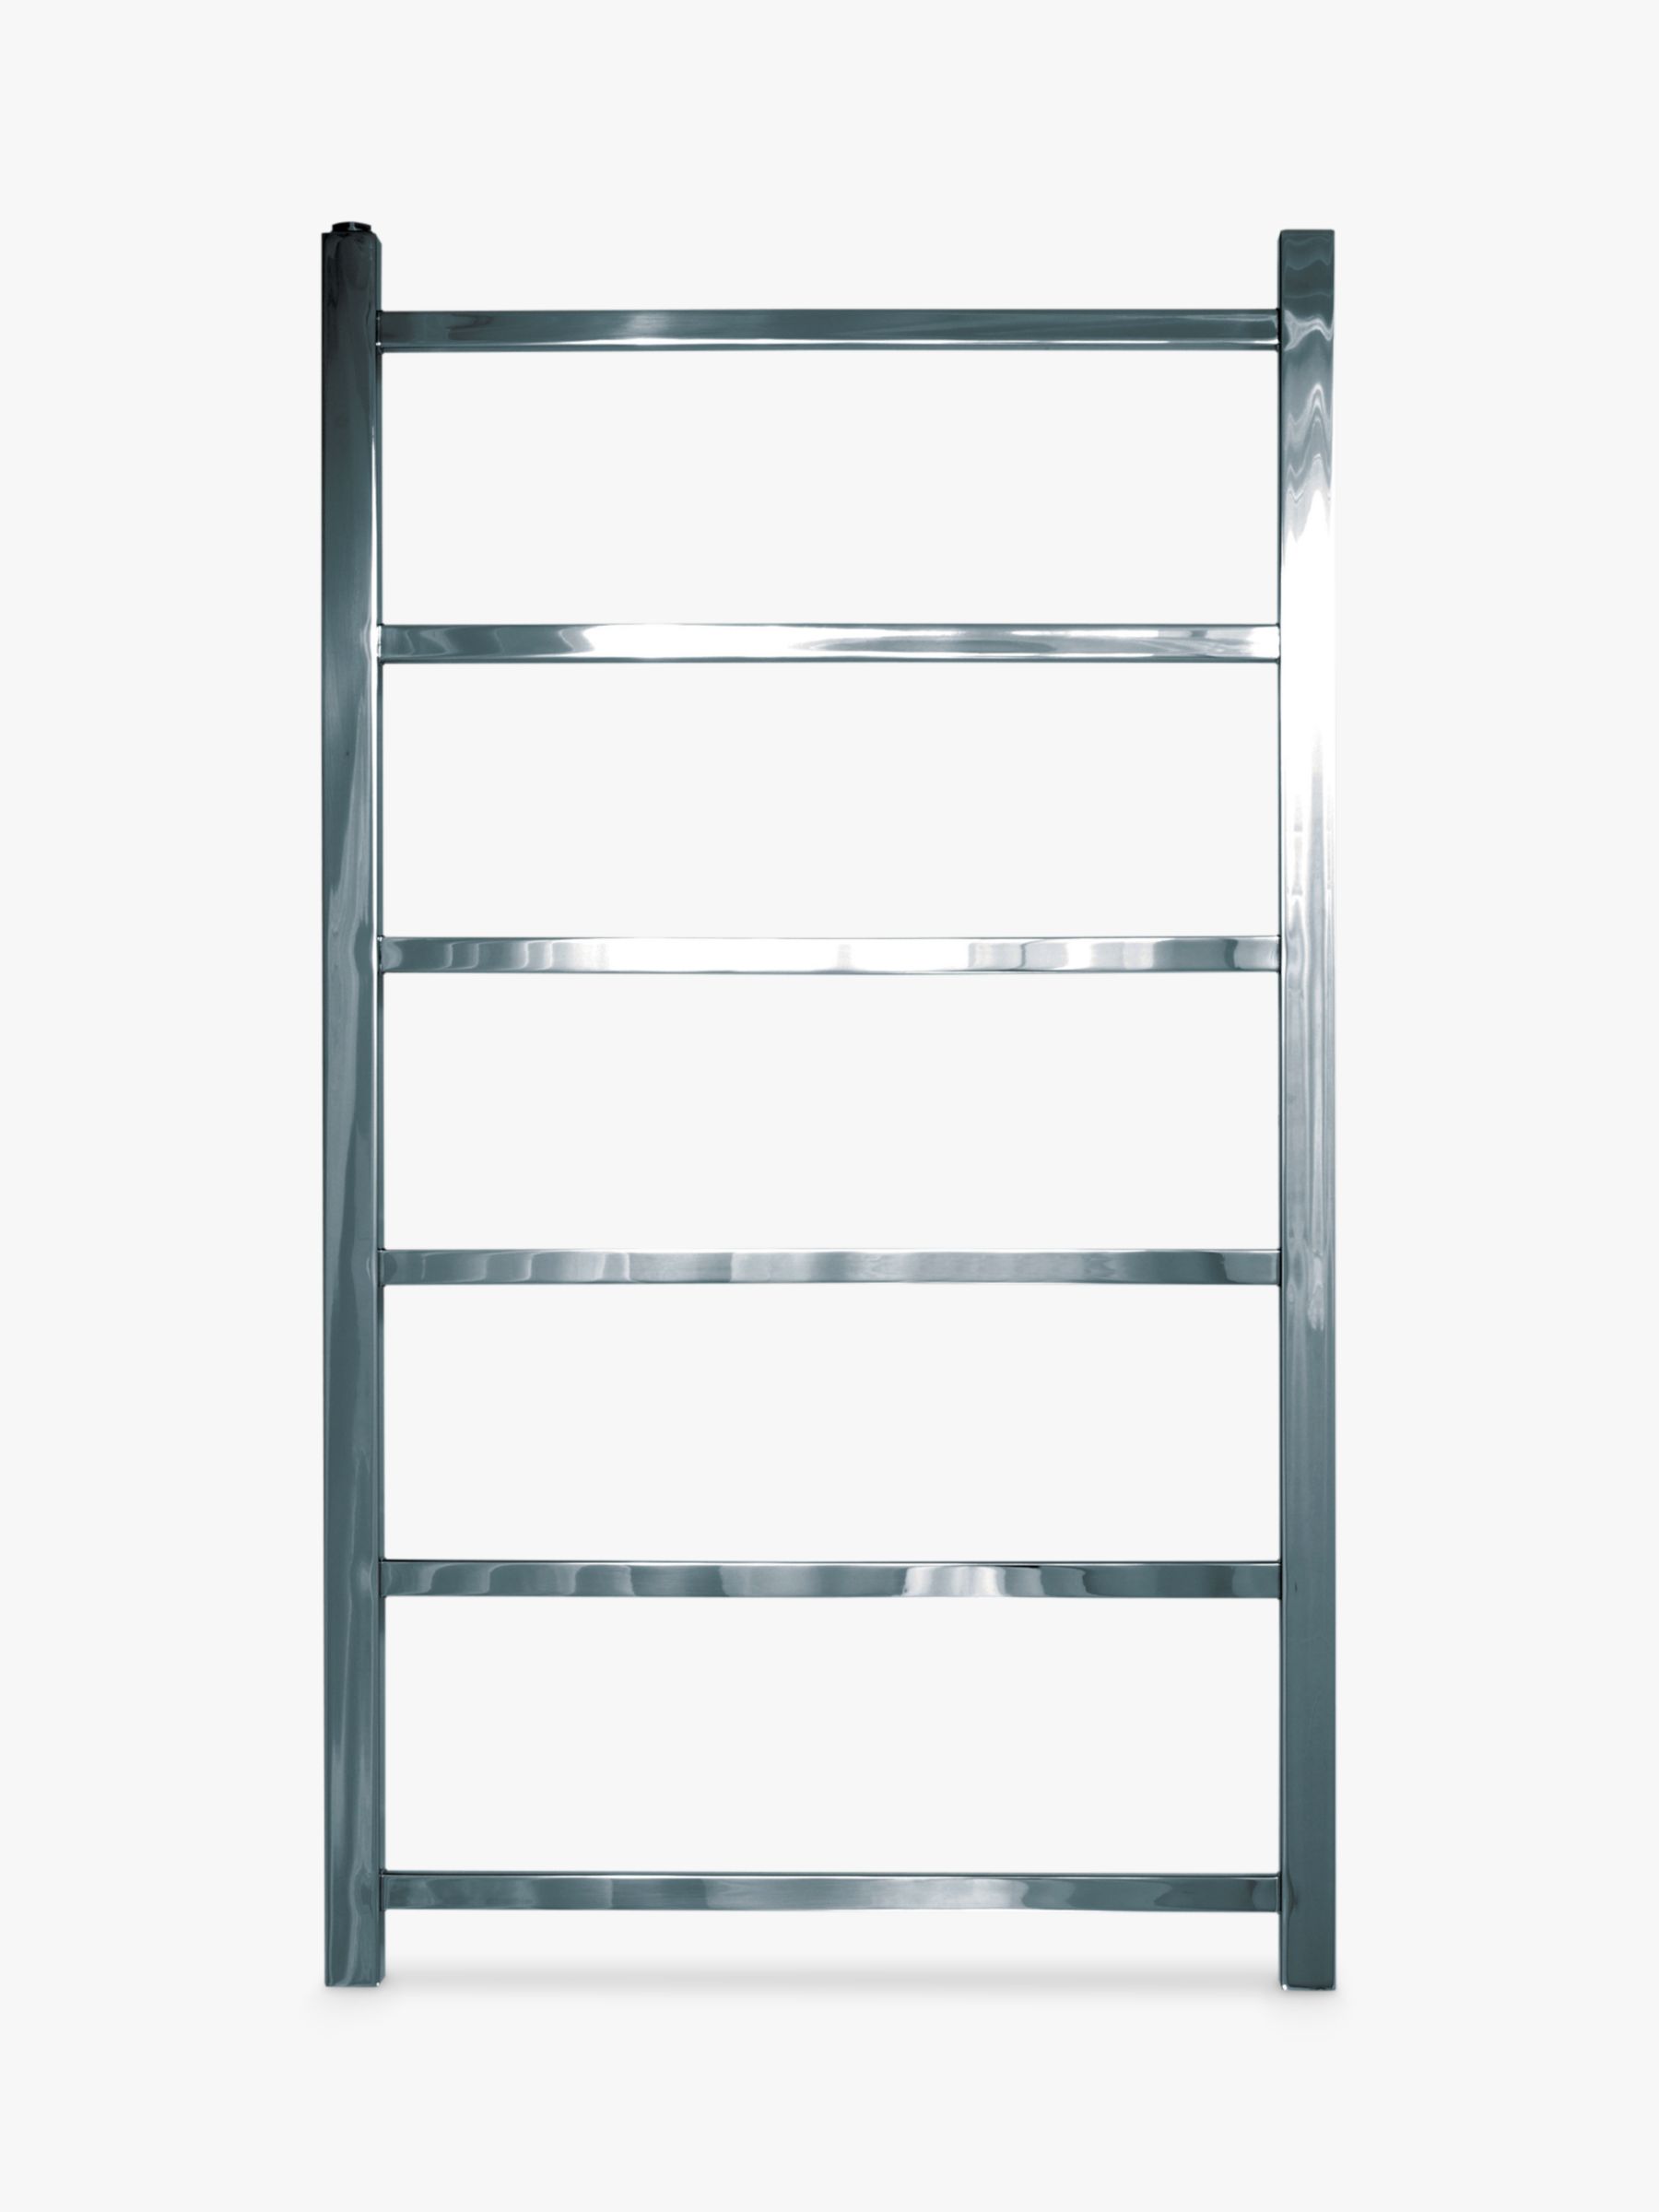 John Lewis & Partners Peel 900 Dual Fuel Heated Towel Rail and Valves, from the Wall